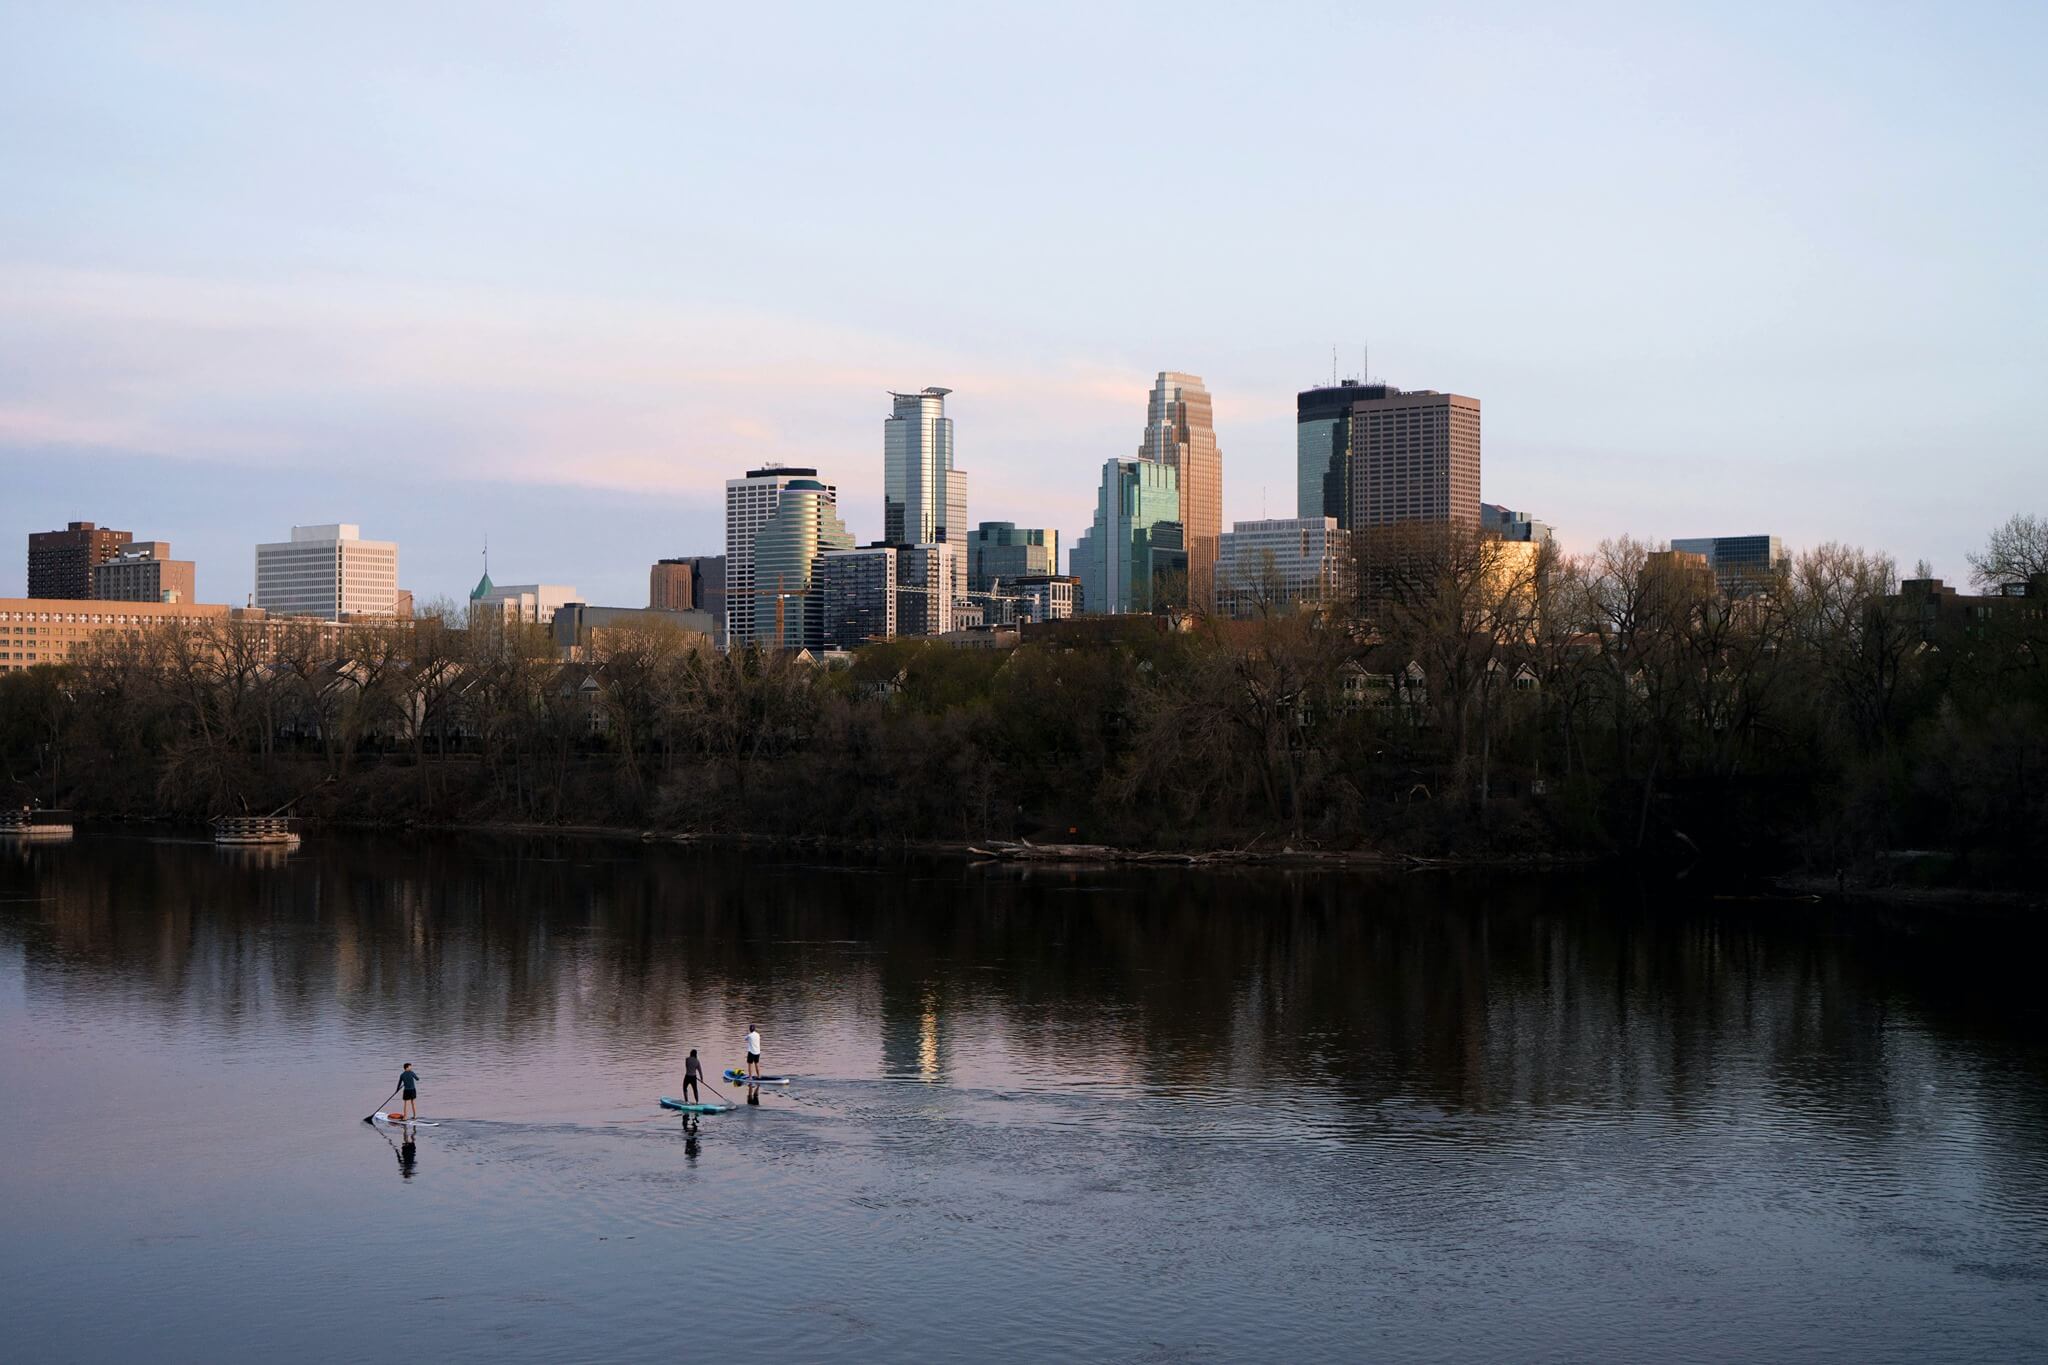  Twilight cityscape of Minneapolis with paddle boarders on the water.